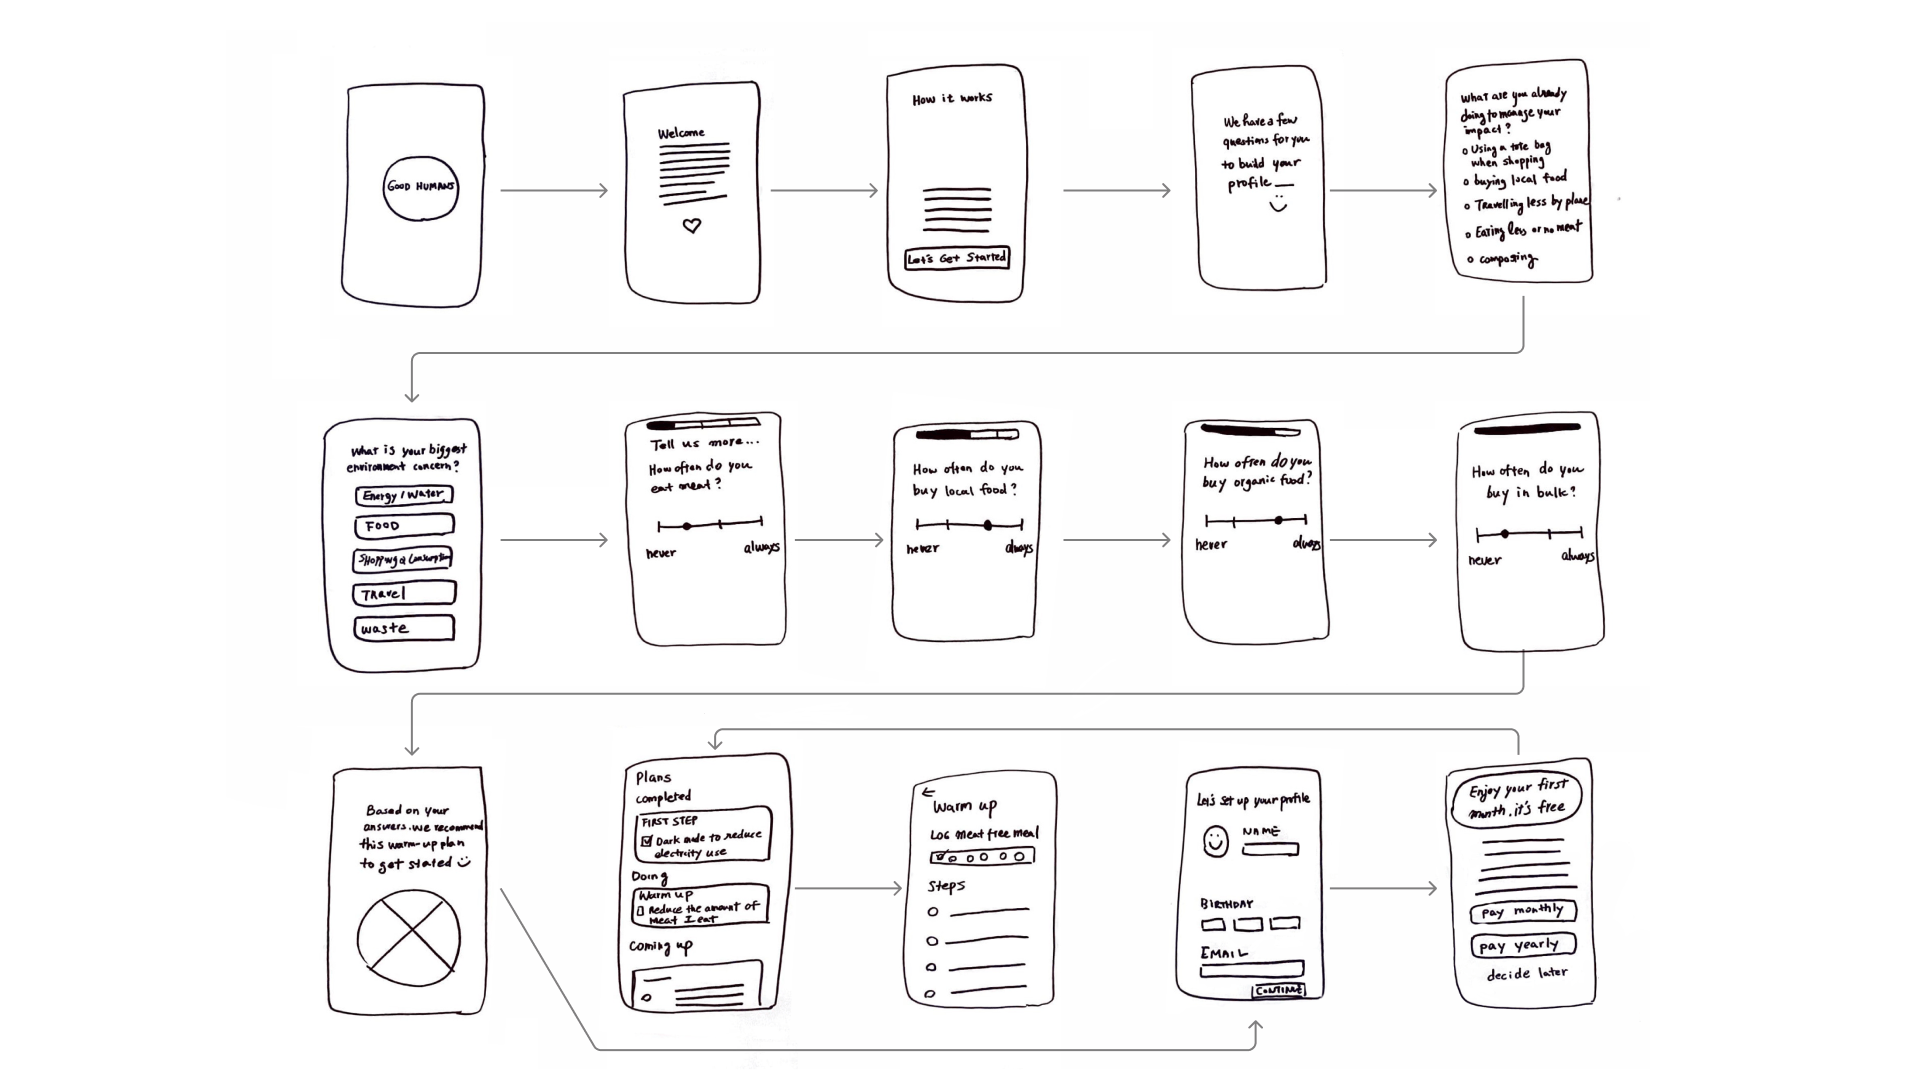 Early hand-drawn sketches of onboarding screens in low fidelity.